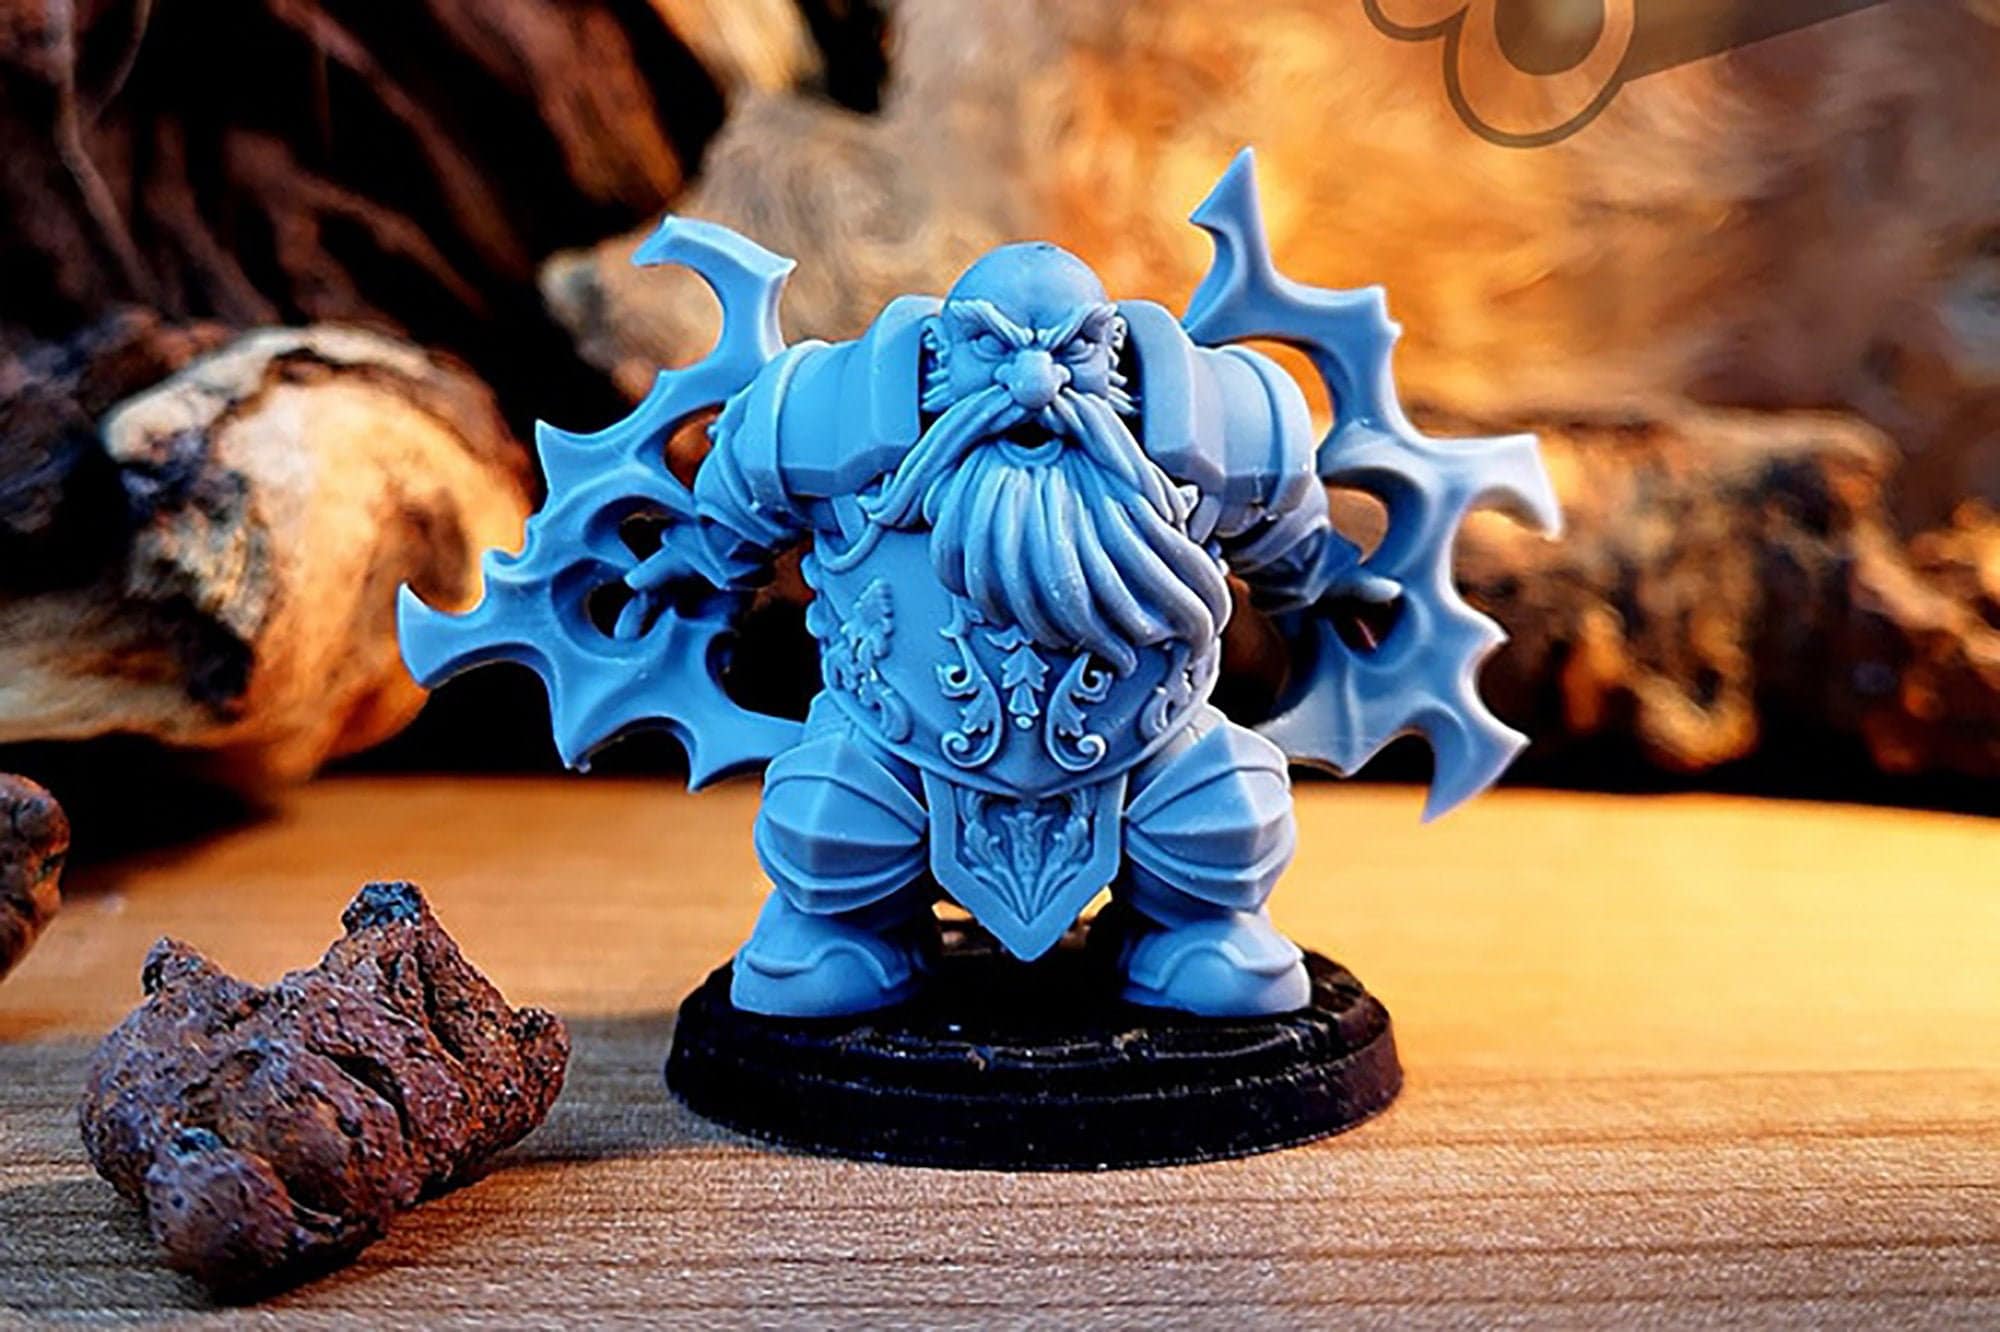 Dwarf STORM PRIEST (M) "Rargtad the Electrocutioner"-Role Playing Miniatures